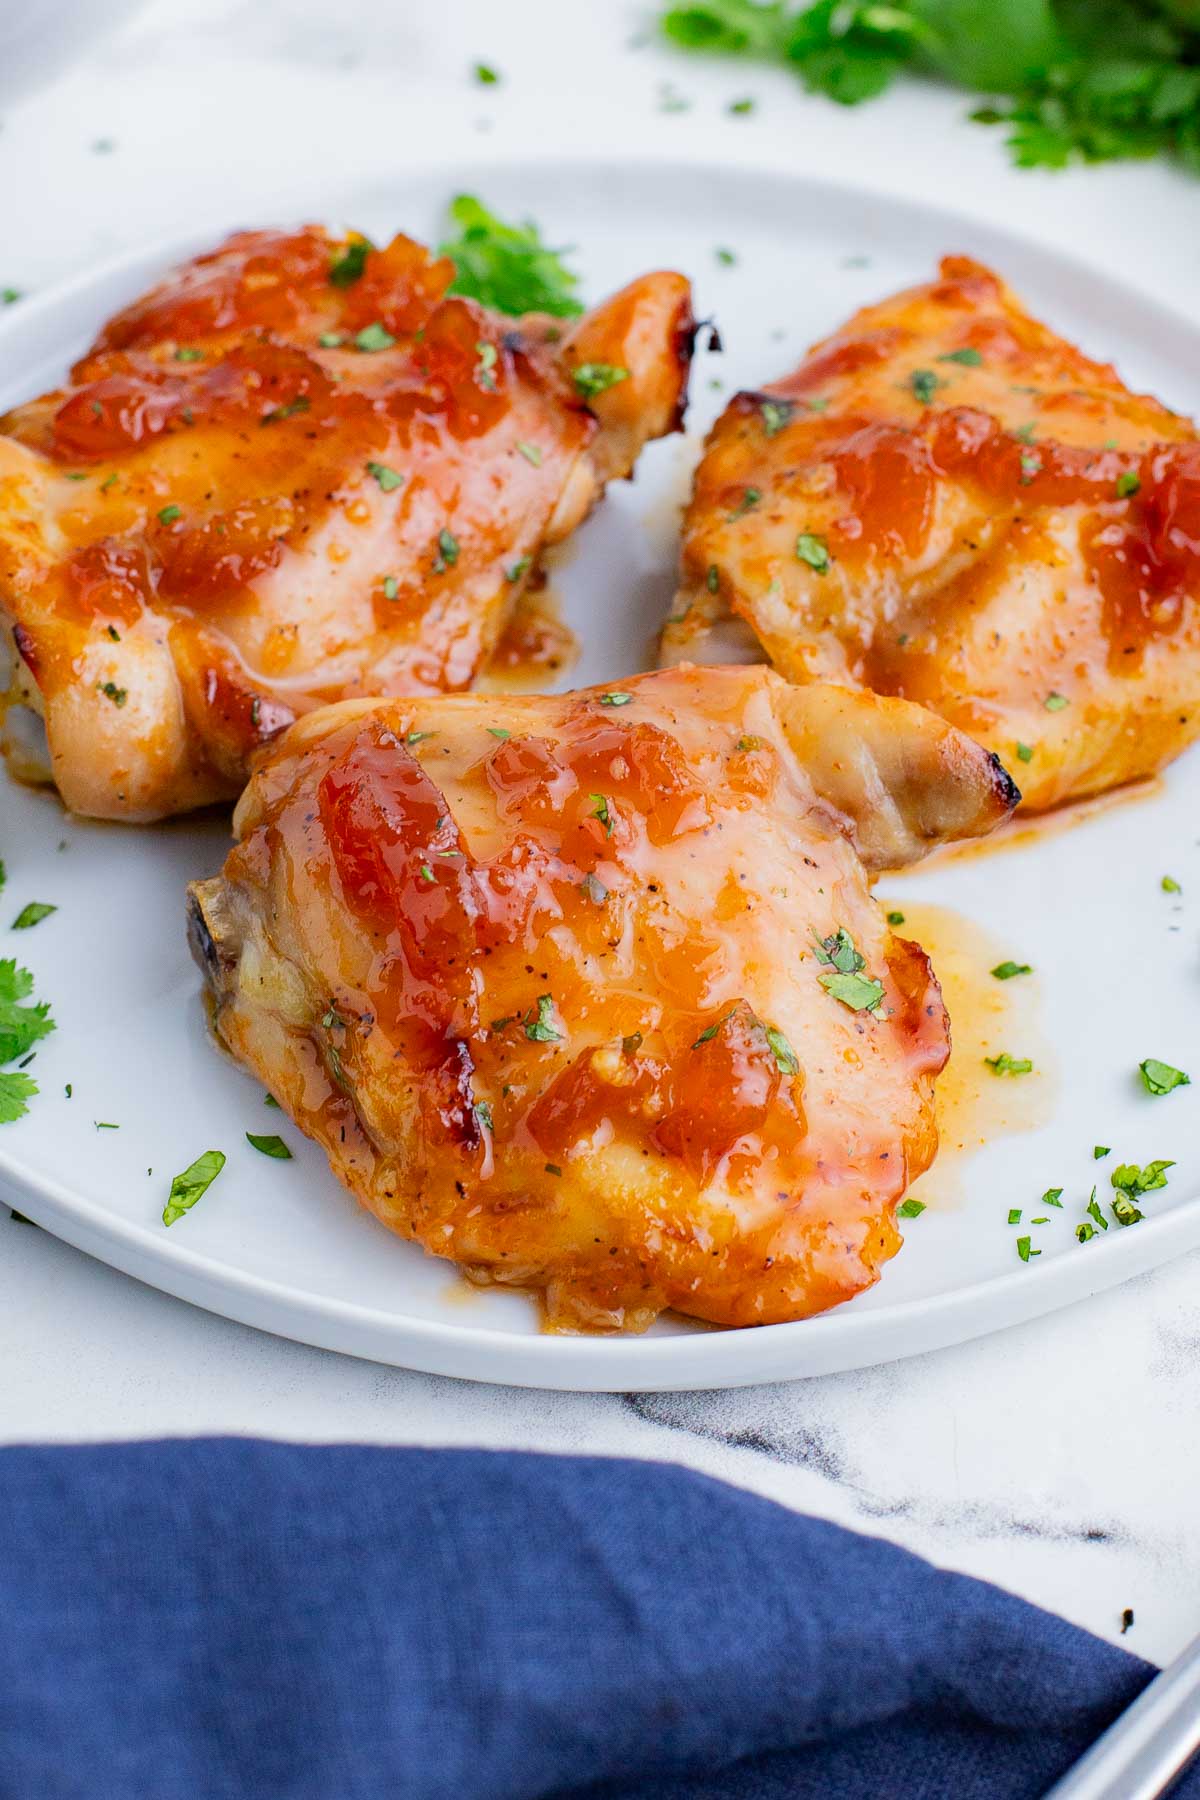 Three chicken thighs in an apricot sauce are served on a white plate.